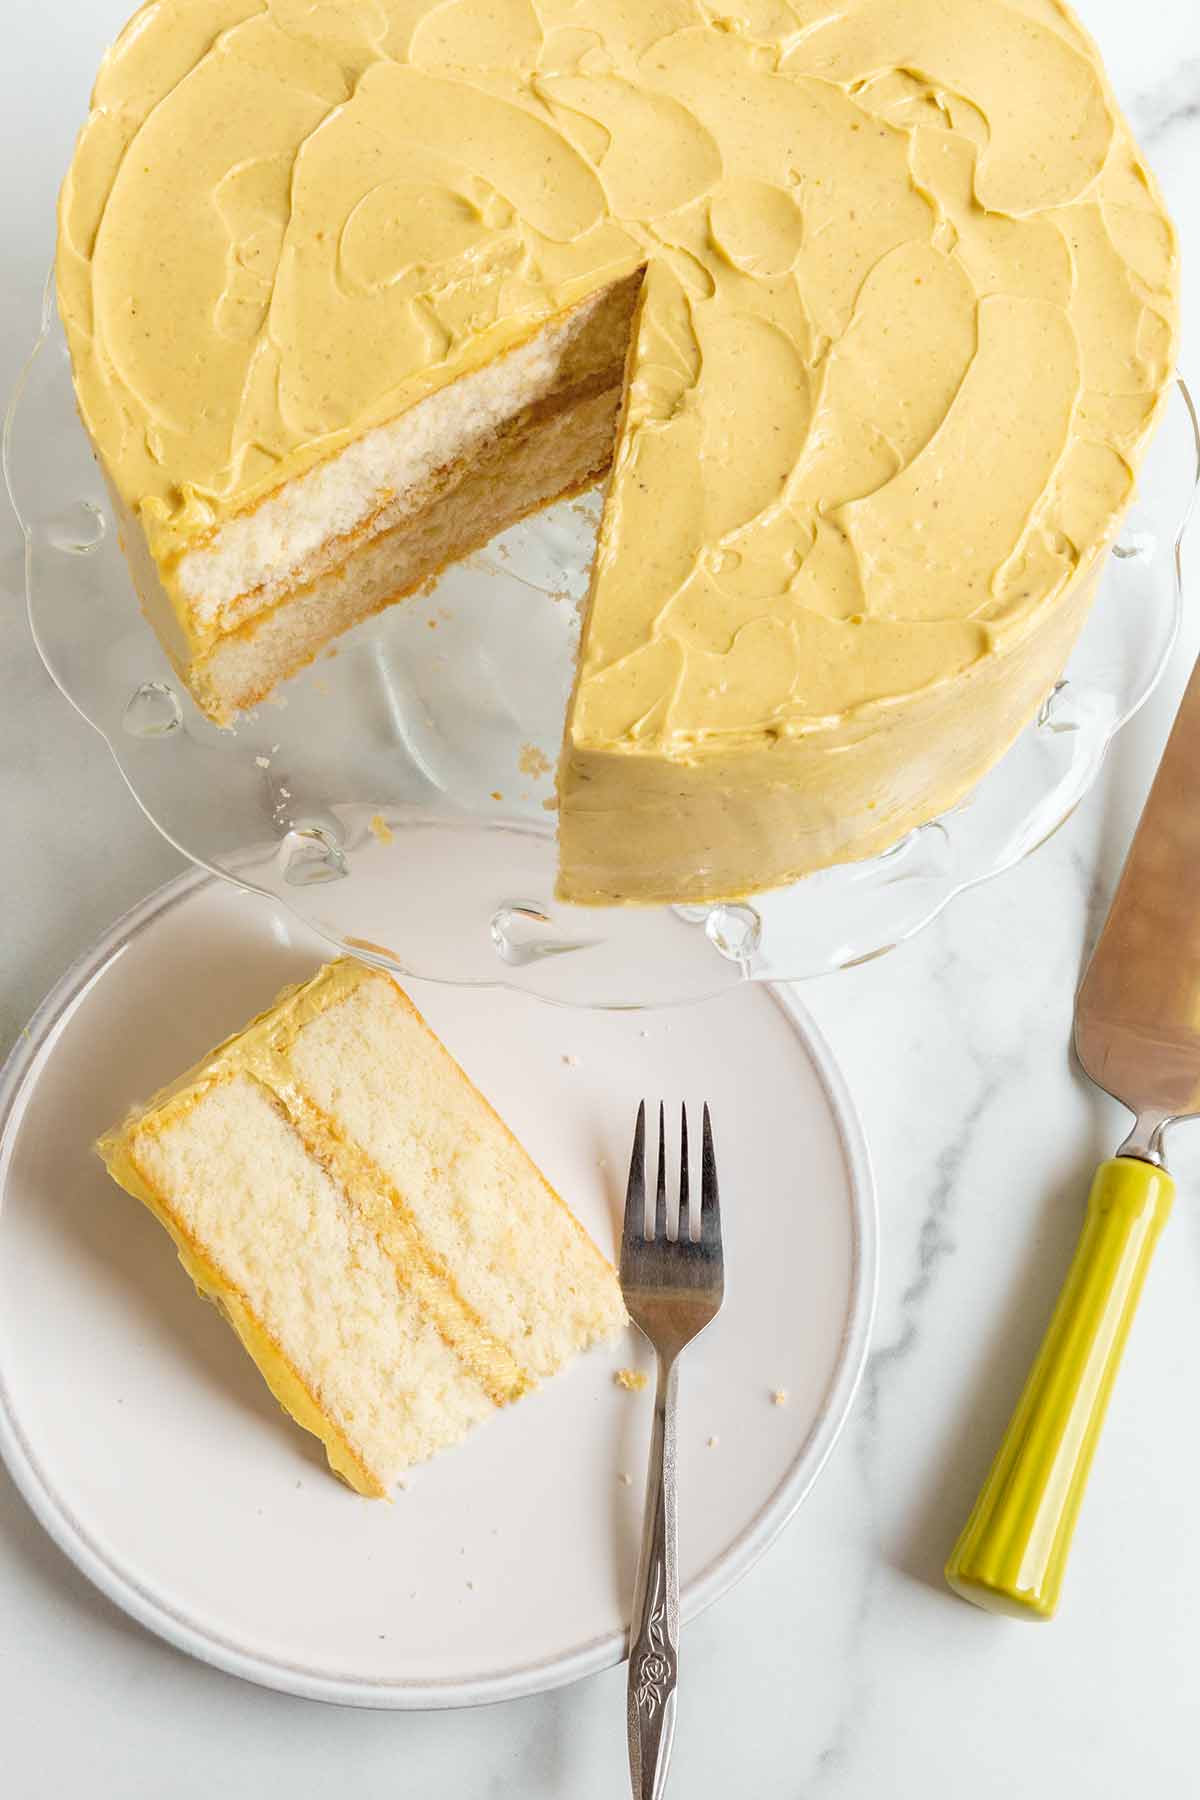 A slice of 2 layer white chocolate whisper cake with pistachio frosting and filling, on a white plate beside a cake stand containing the rest of the cake.